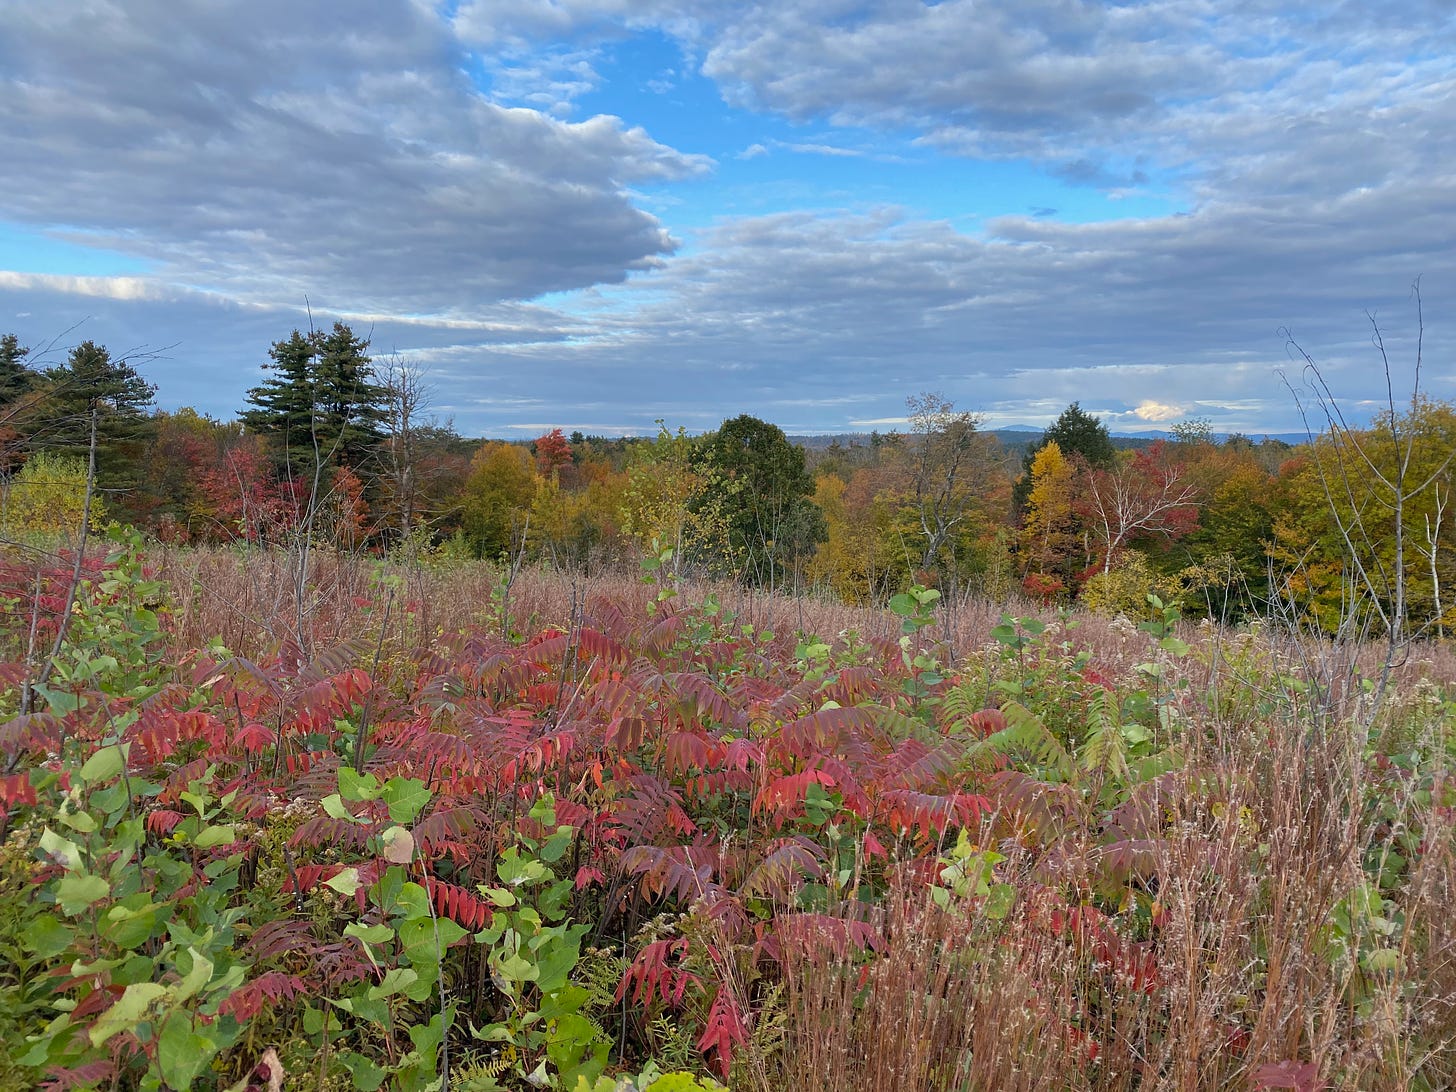 A hilltop field of red and green sumac and brown grasses. The trees on the horizon are red, gold, orange, yellow, and green; the clouds above are silvery purple.